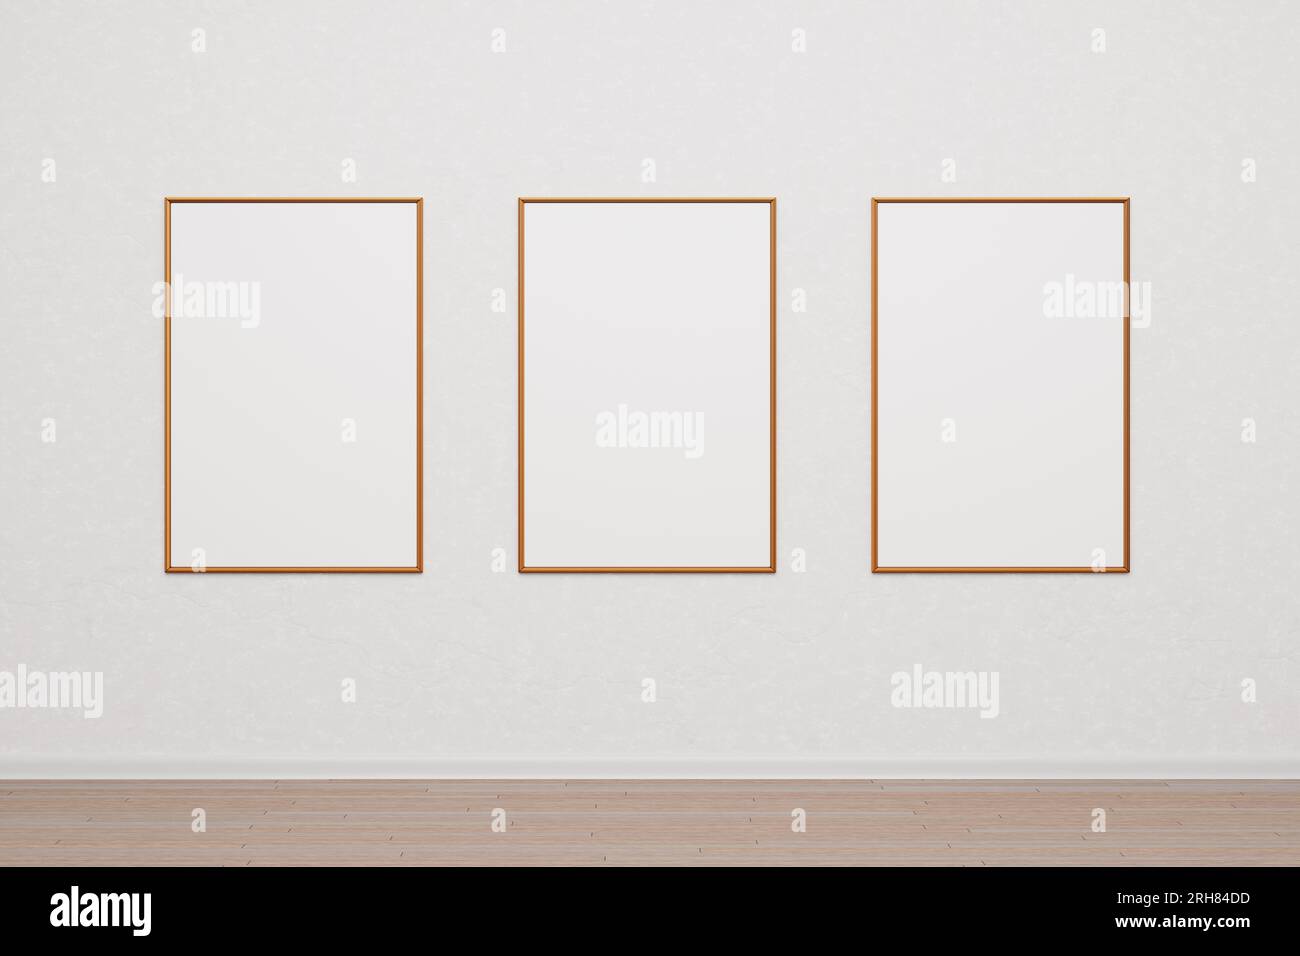 Three empty wooden frames for a photo or picture on a white wall. Mockup paintings, posters, photographs. Design template for layout. 3D rendering. Stock Photo